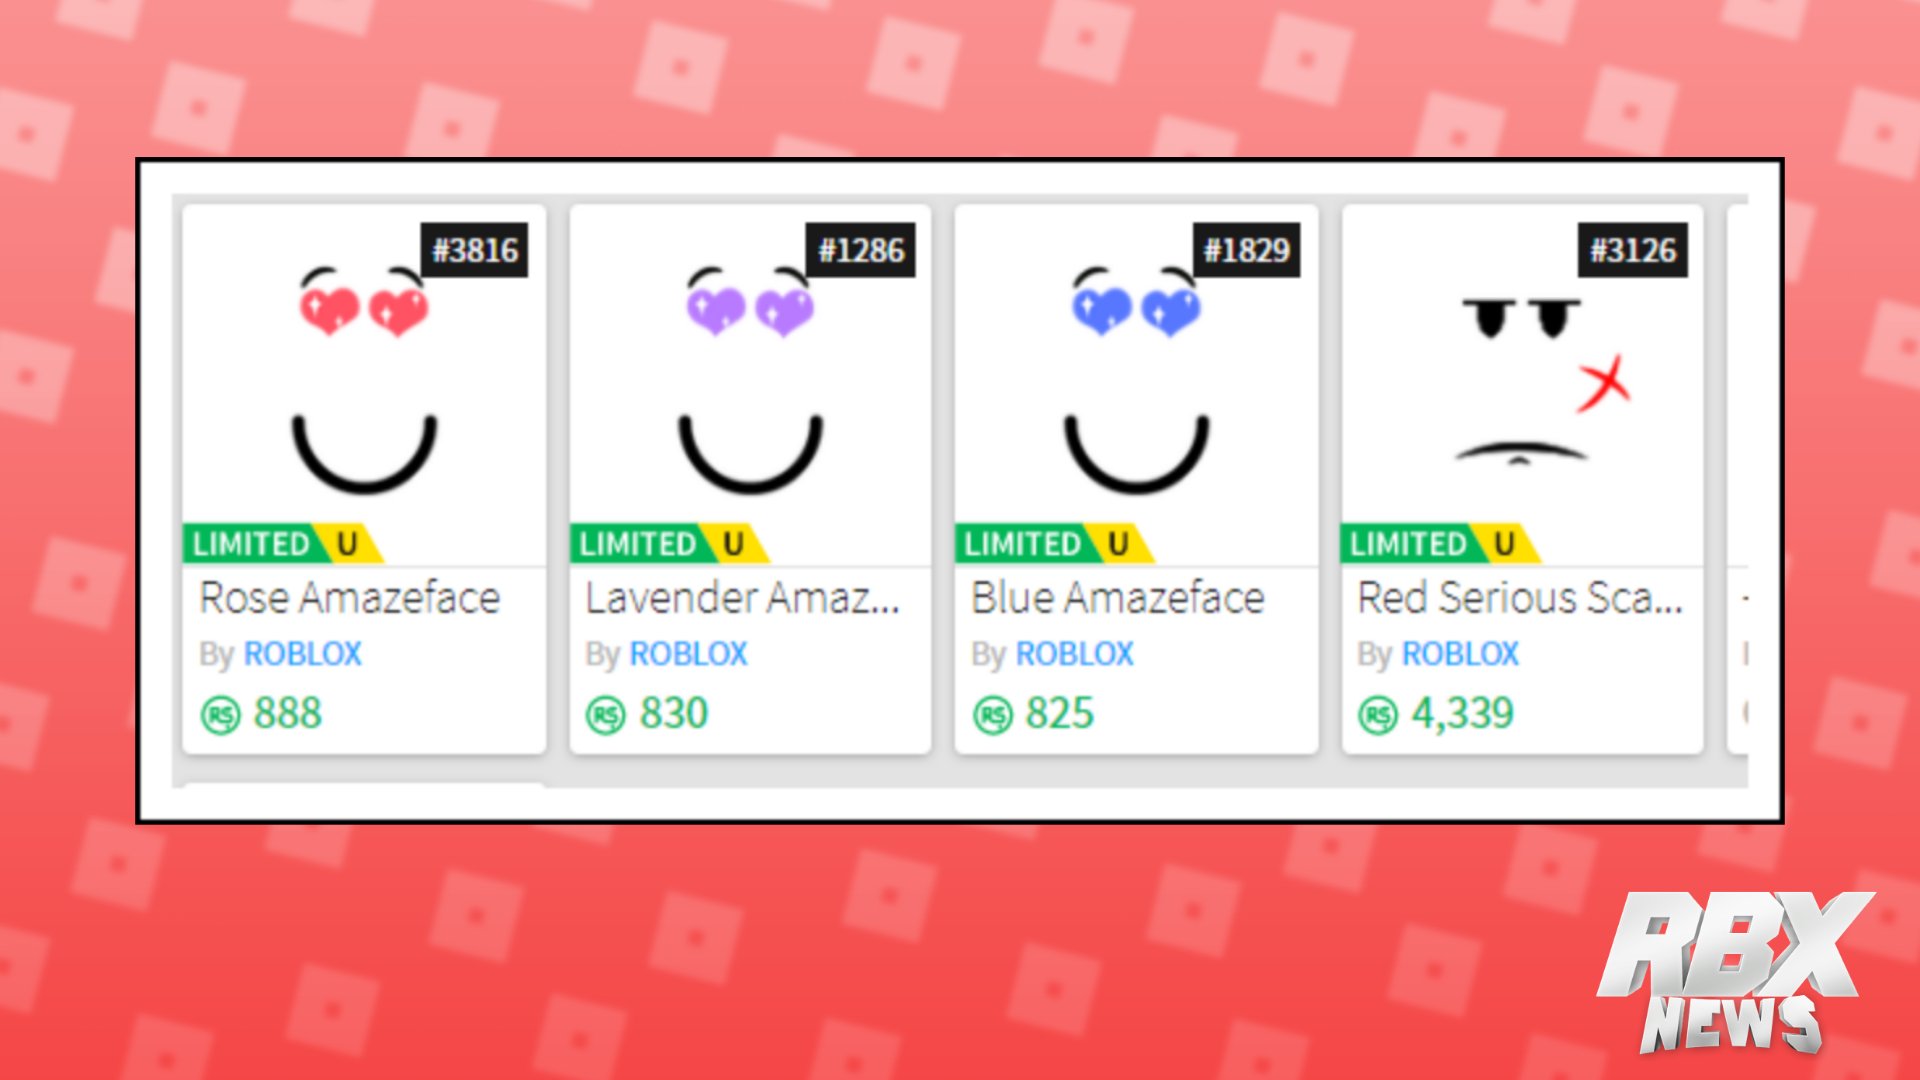 Rbxnews On Twitter If You Own Any Roblox Limited Items Make Sure To Check On How They Re Doing Many Items Have Increased Drastically Over The Past Few Weeks Value Checking Sites - roblox catalog limited